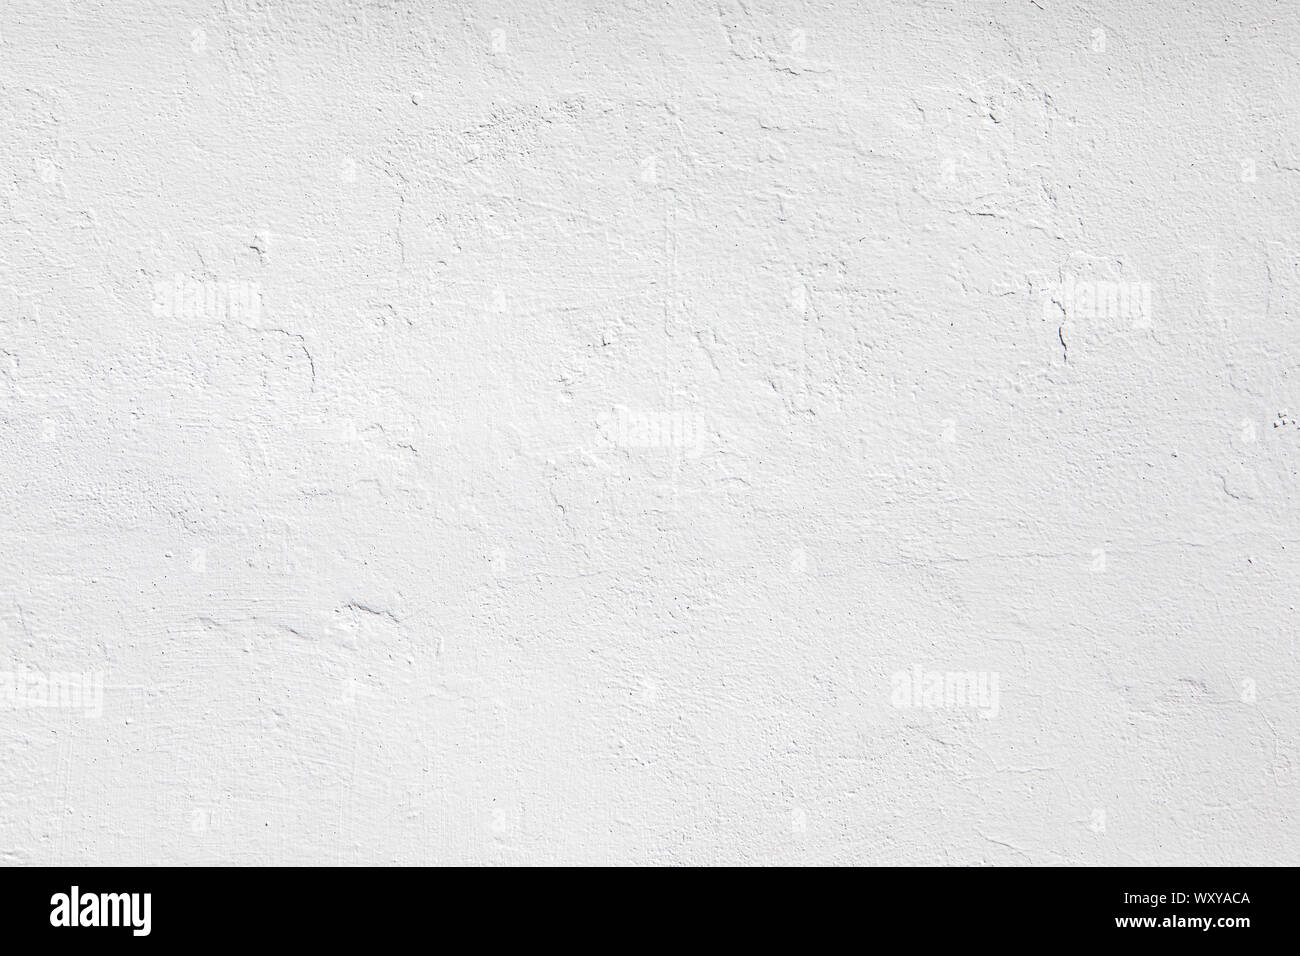 Neutral white colored low contrast Concrete textured background with roughness and irregularities to your concept or product. Stock Photo